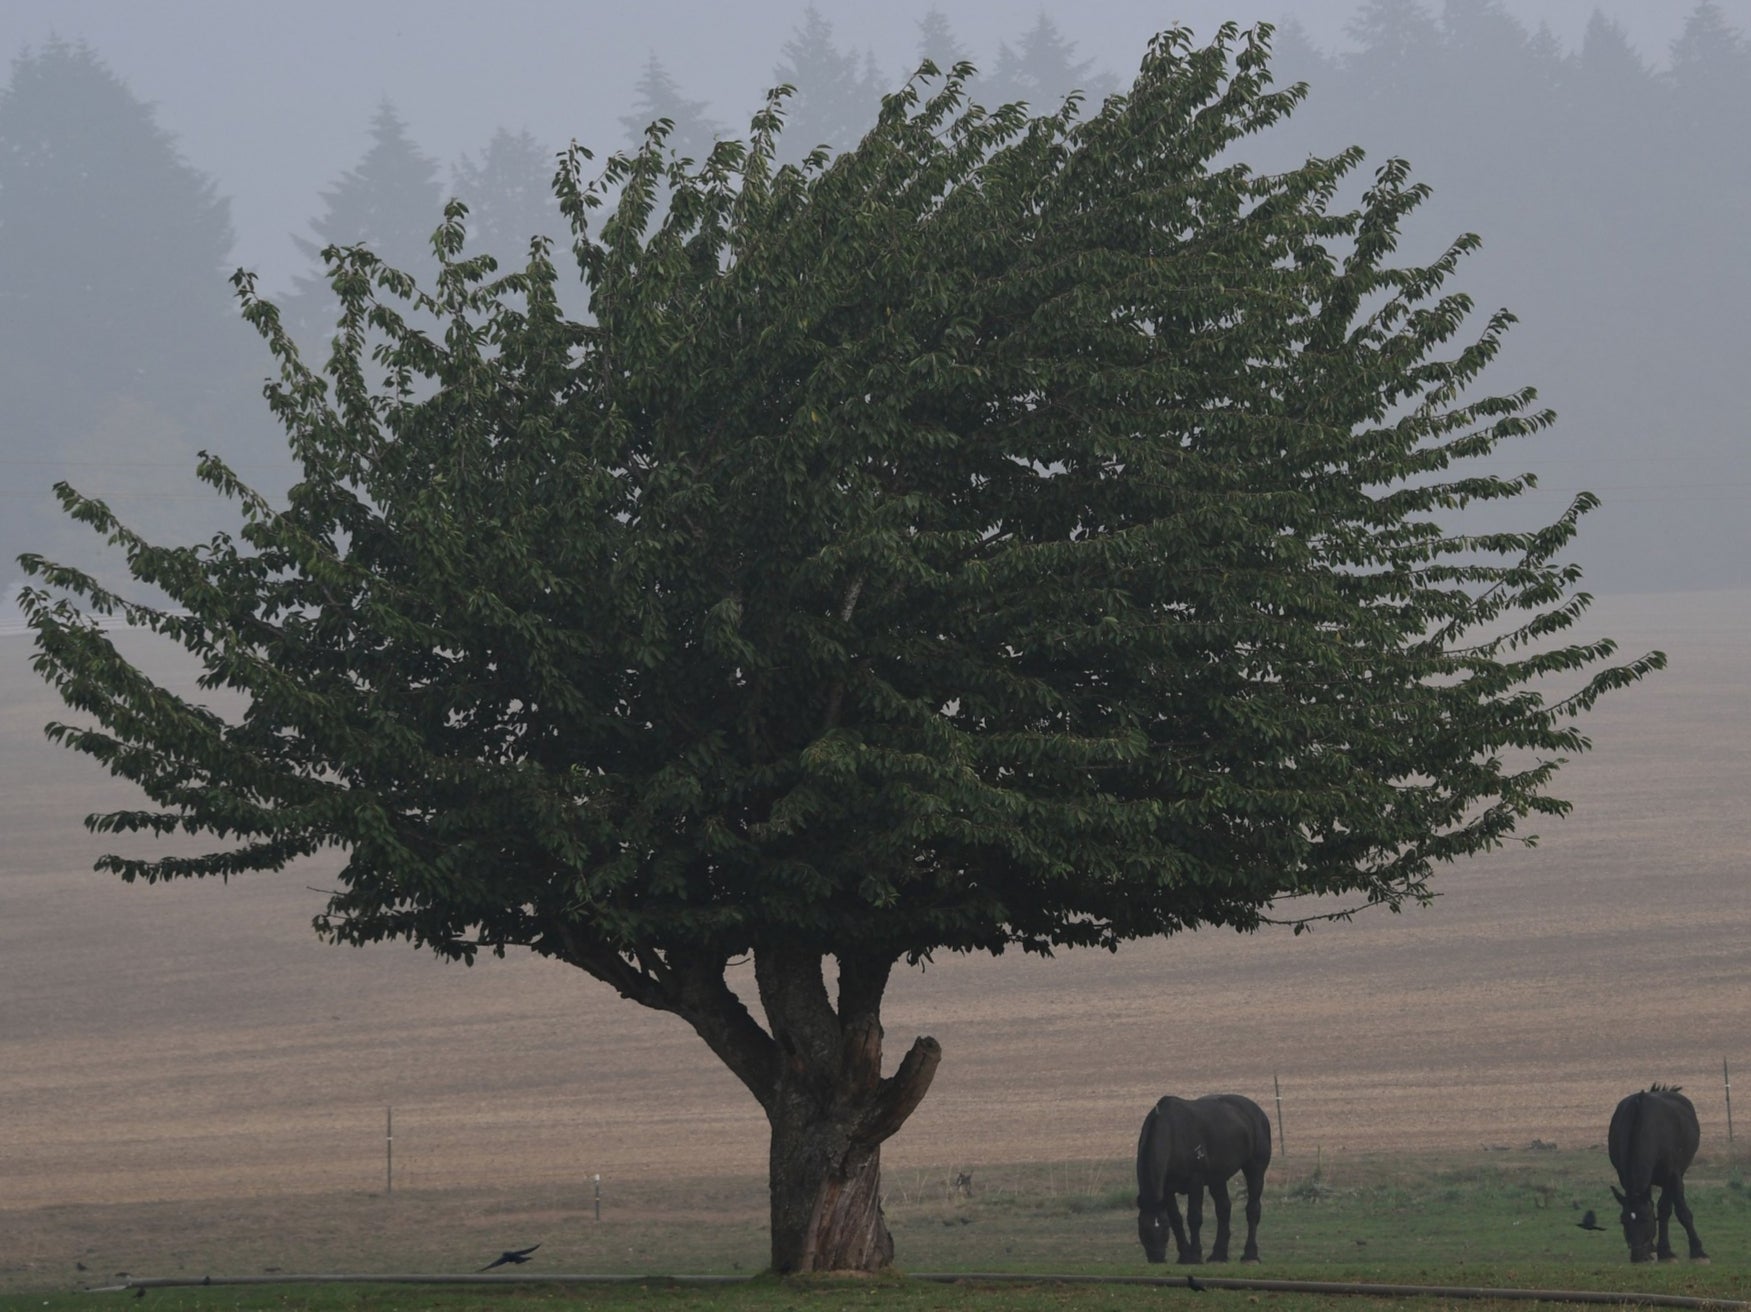 Horses graze in a smoke and fog shrouded field on the same day Trump suggested global warming will reverse itself and dismissed climate change as a cause of California's wildfires